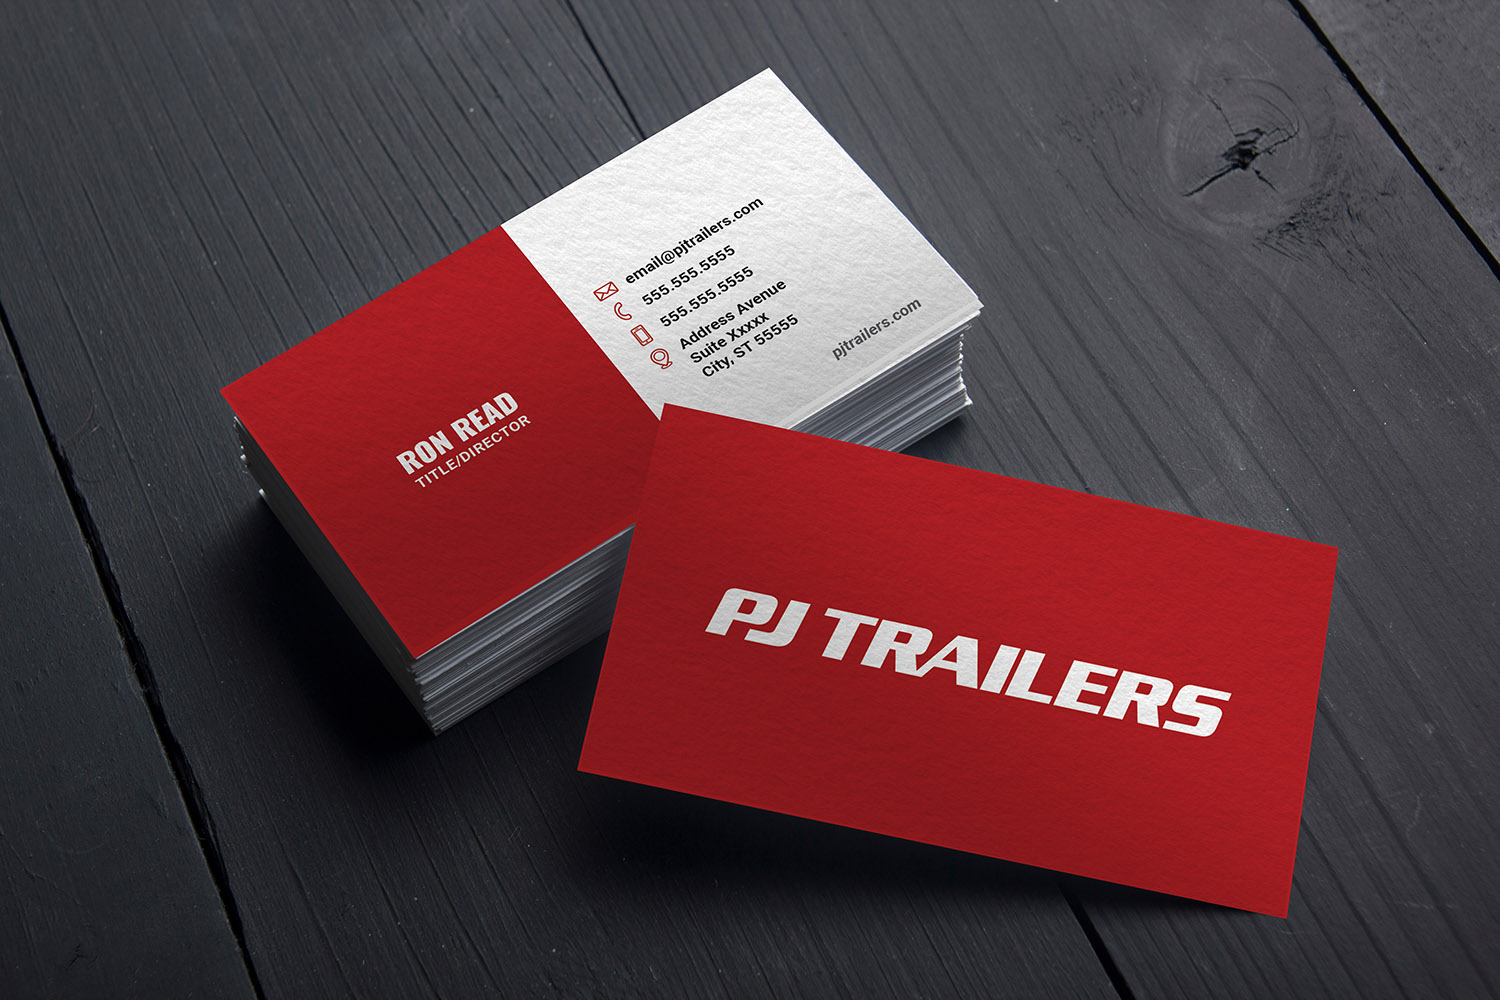 PJ Trailers Branding & Collateral